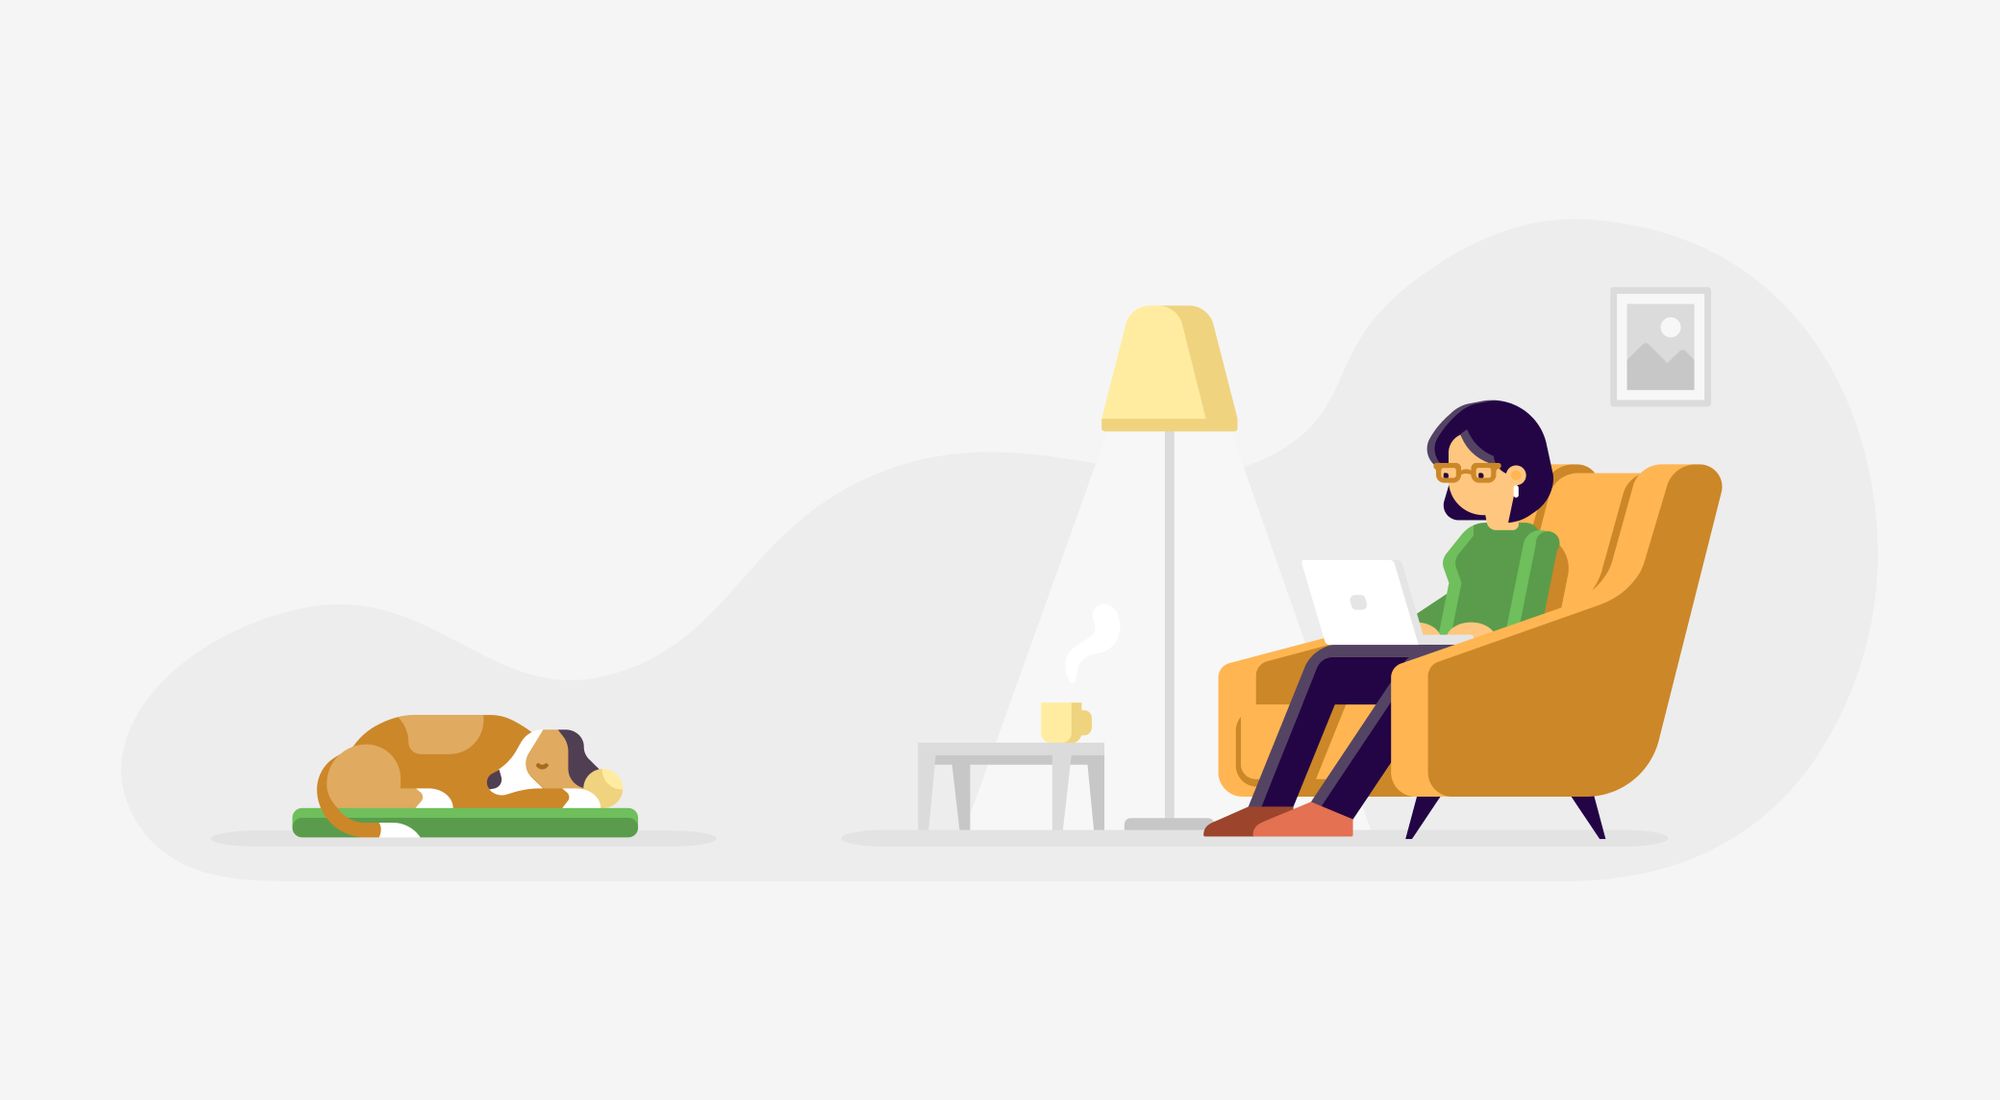 Working Remotely for the First Time? Here Are 5 Tips From Our All-Remote Team